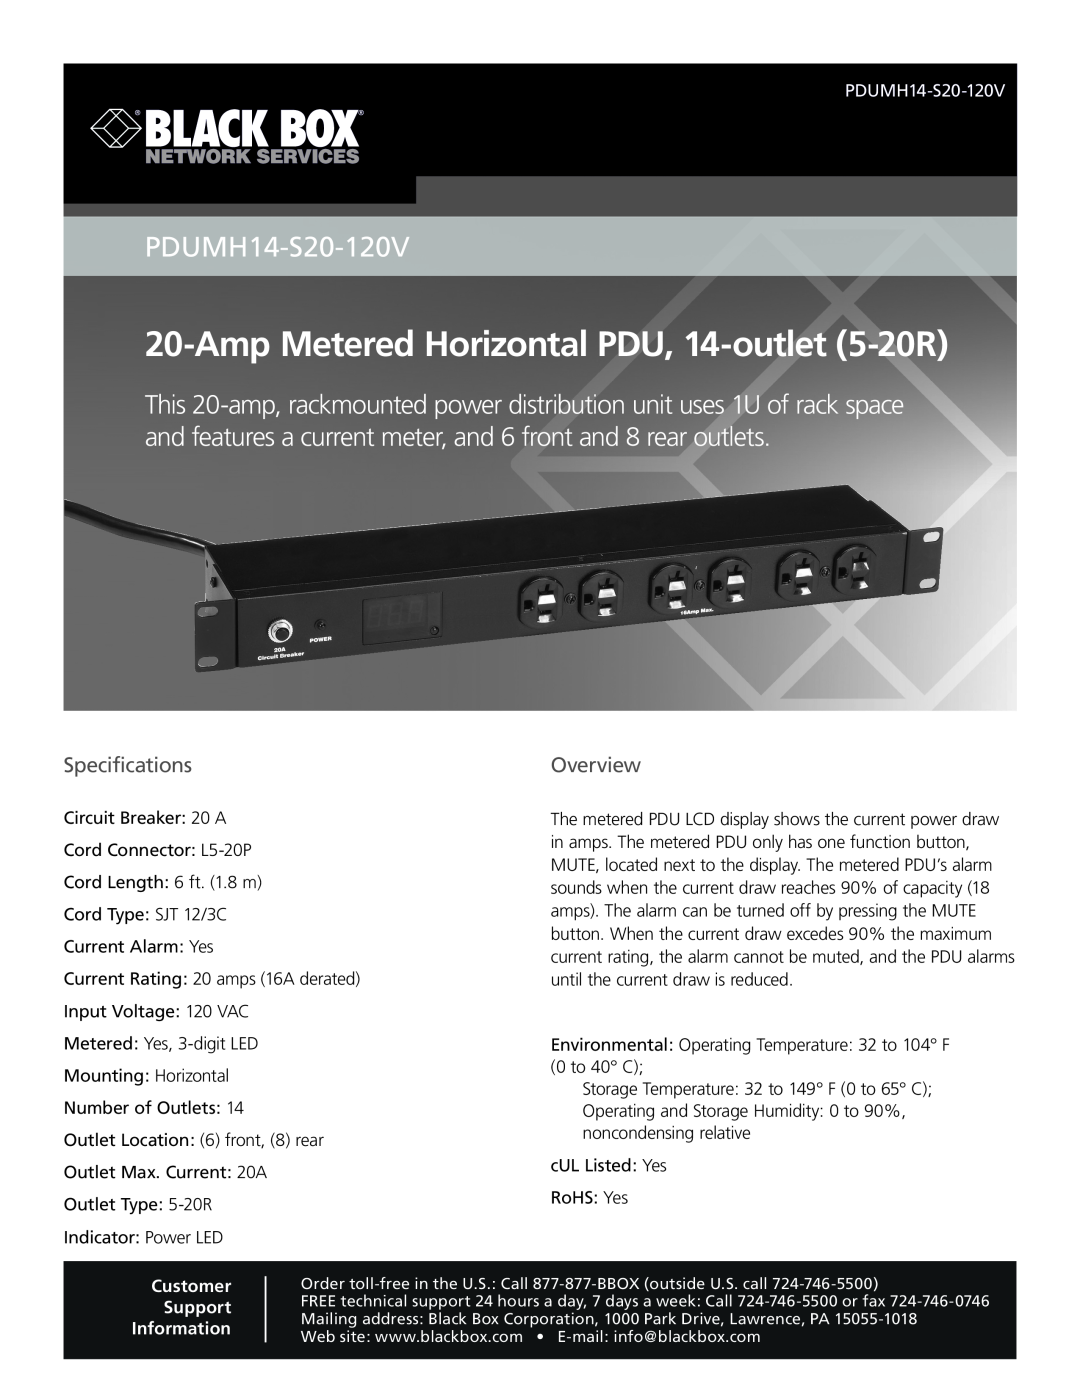 Black Box 20-Amp Metered Horizontal PDU, 14-outlet (5-20R) specifications Specifications, Overview, PDUMH14-S20-120V 